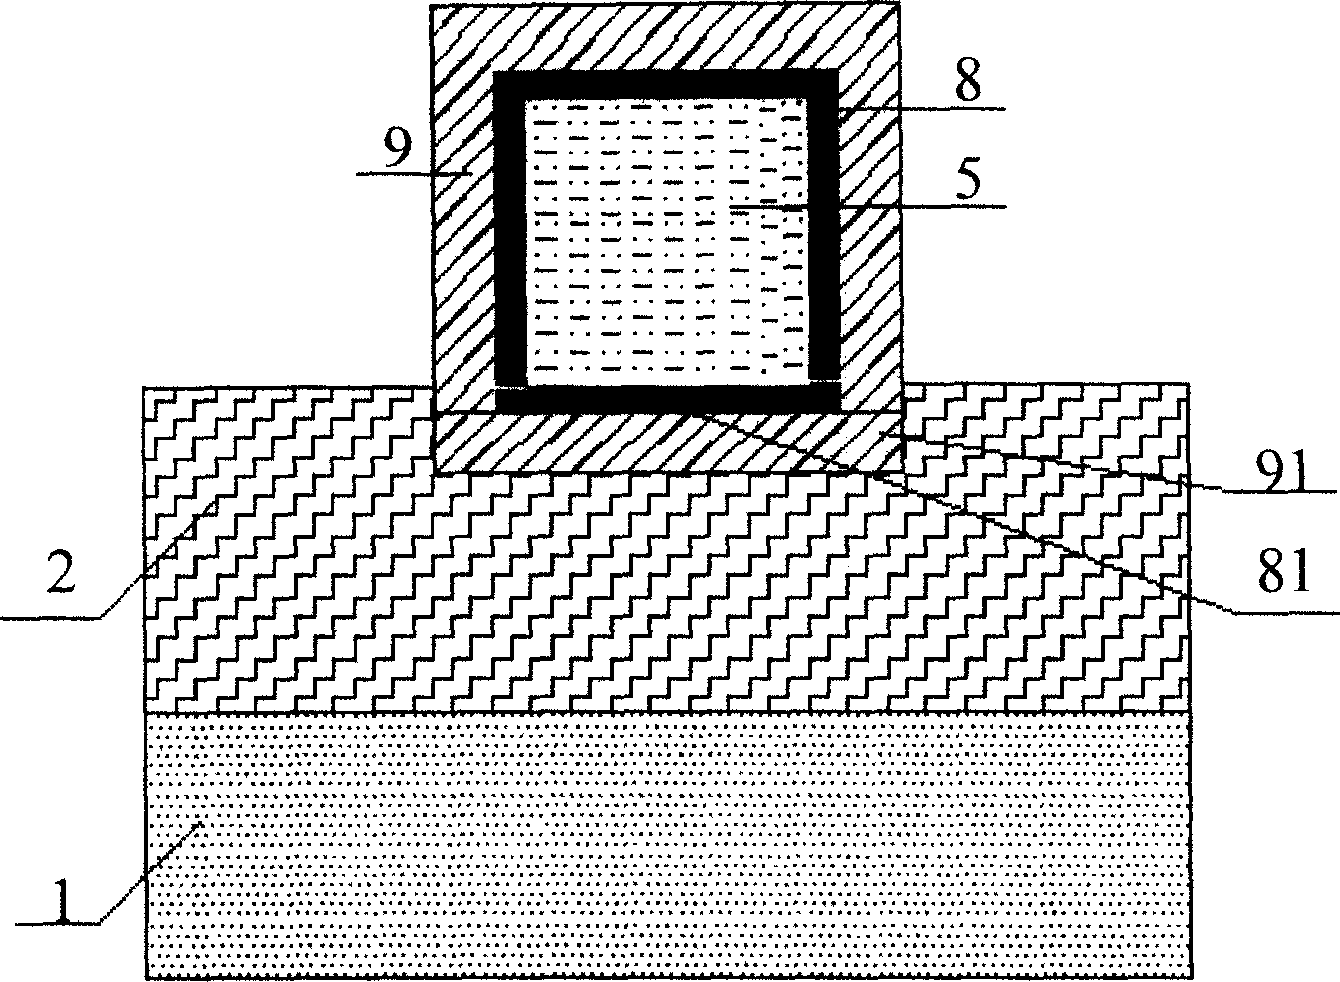 Three-dimensional multi-gate high-voltage N type transverse double-diffused metal-oxide semiconductor device